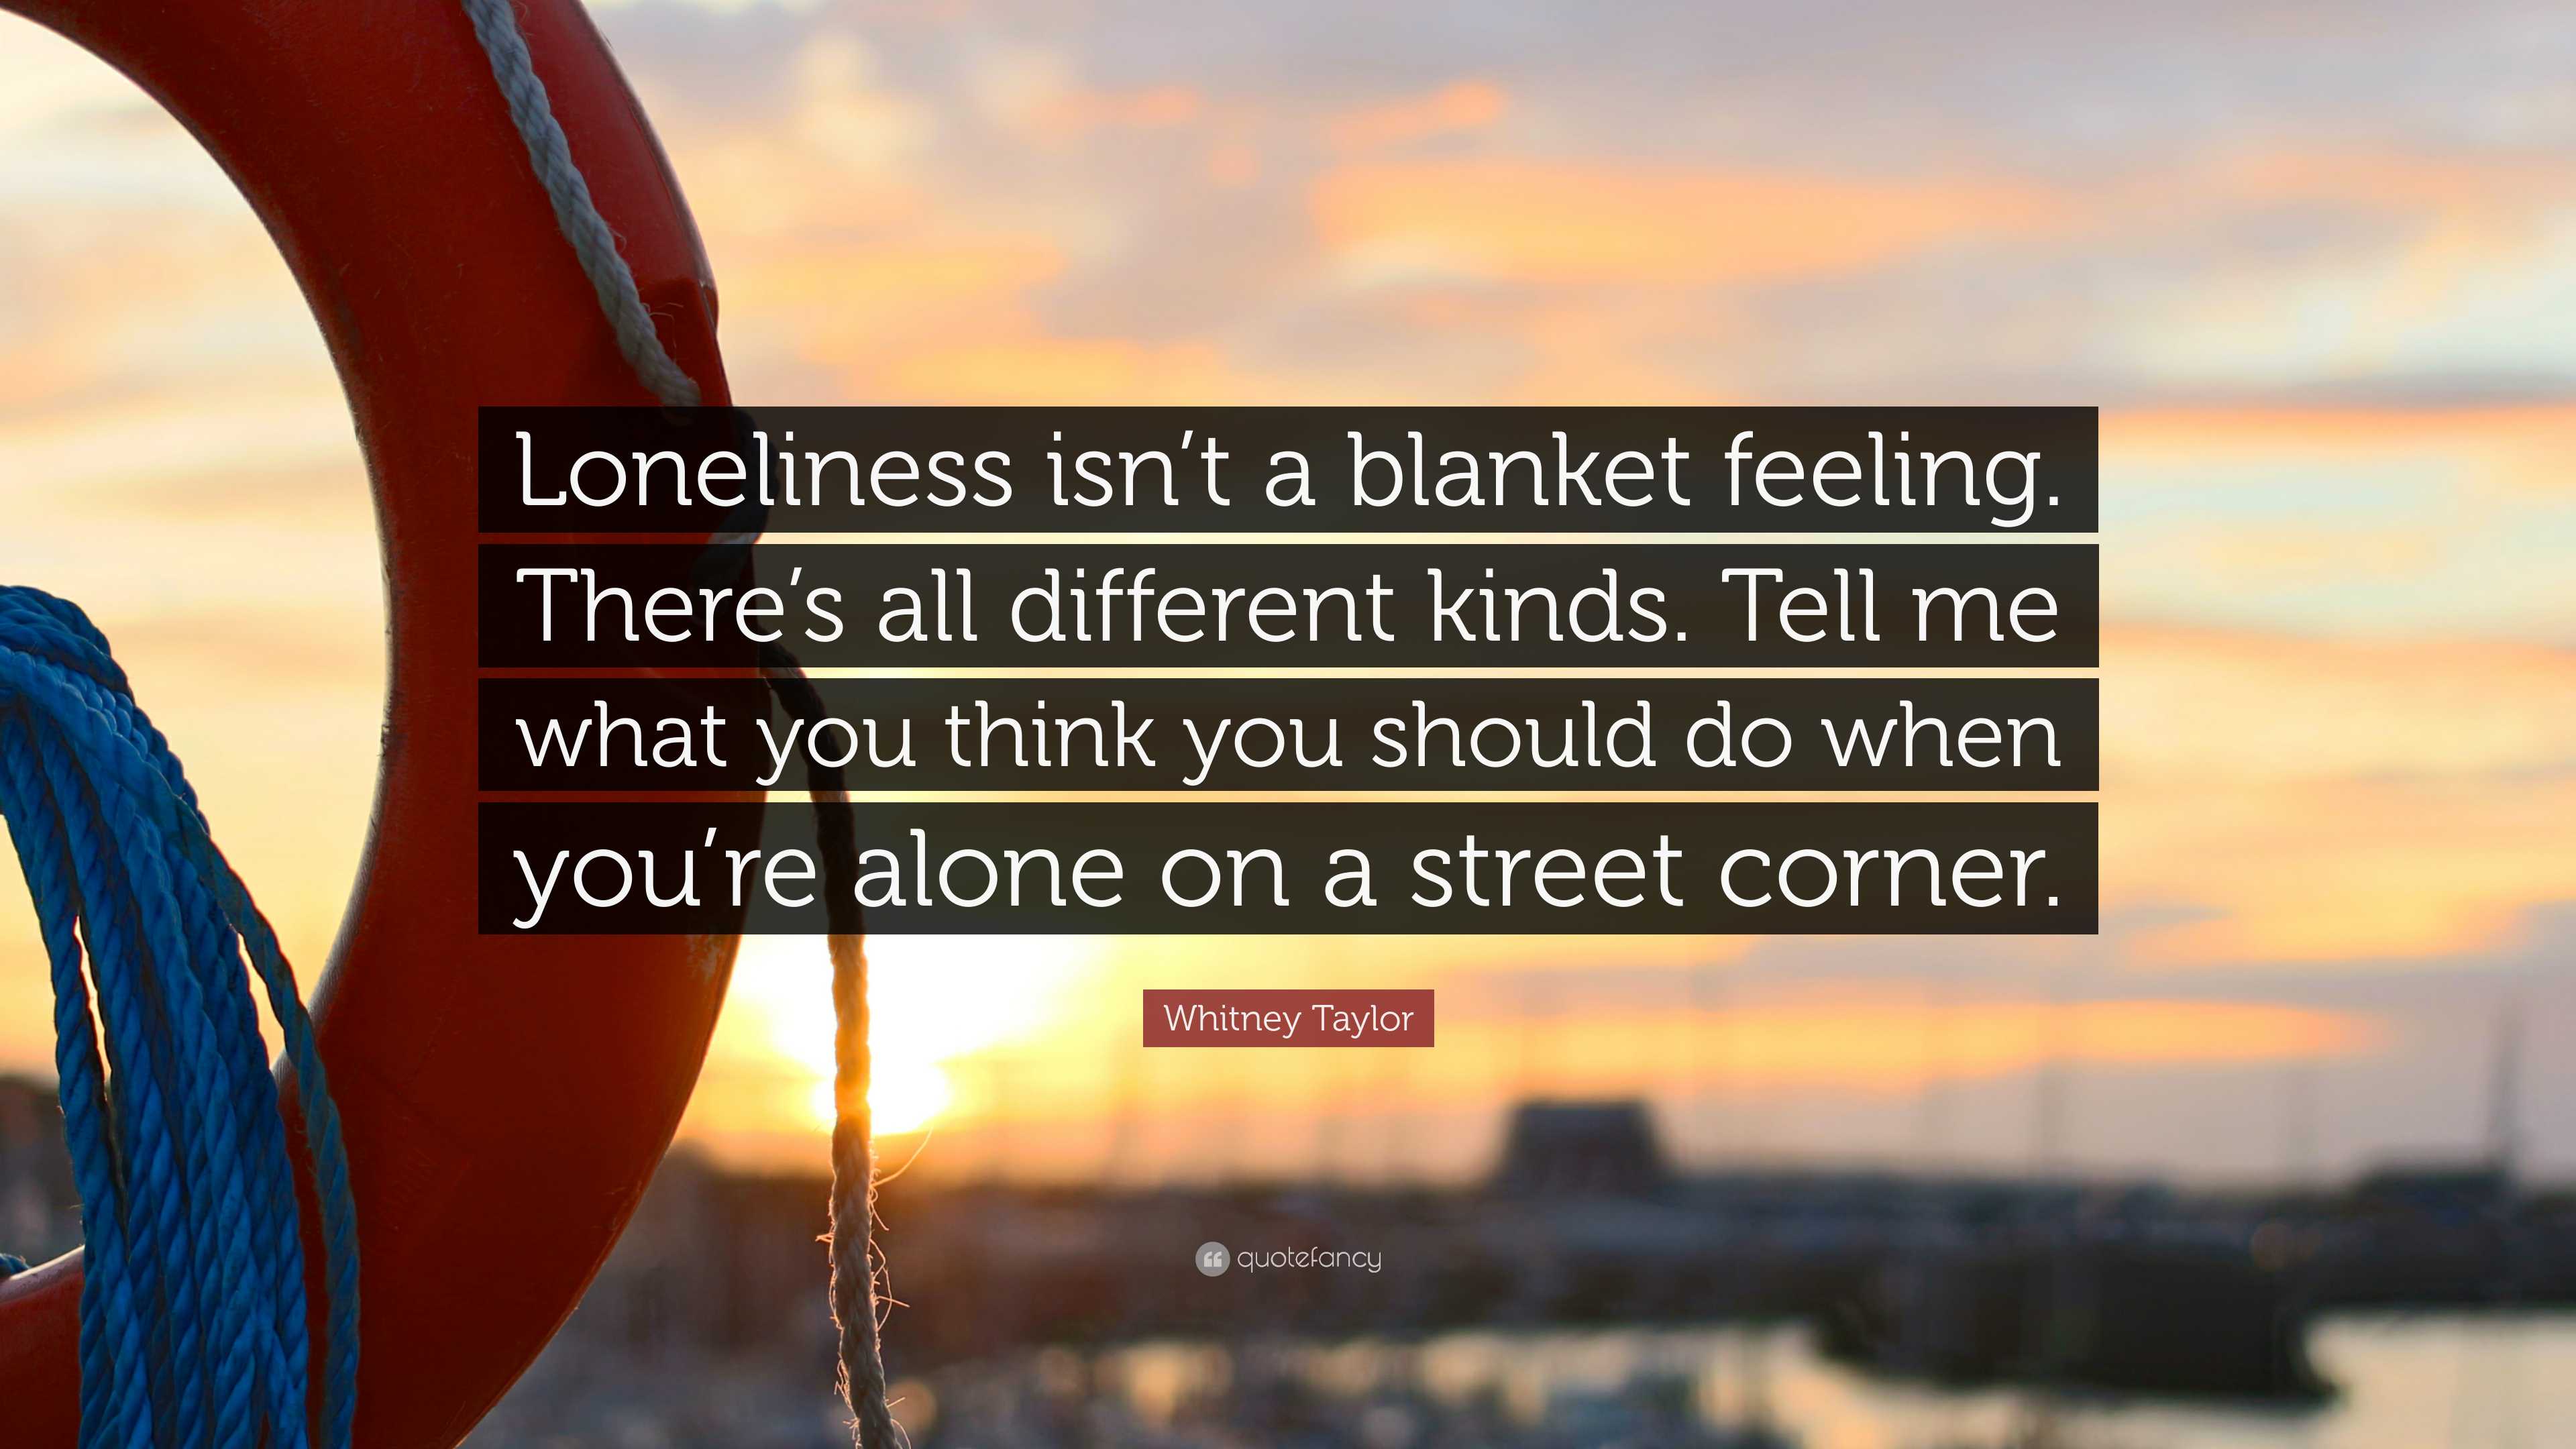 Whitney Taylor Quote: “Loneliness isn’t a blanket feeling. There’s all ...